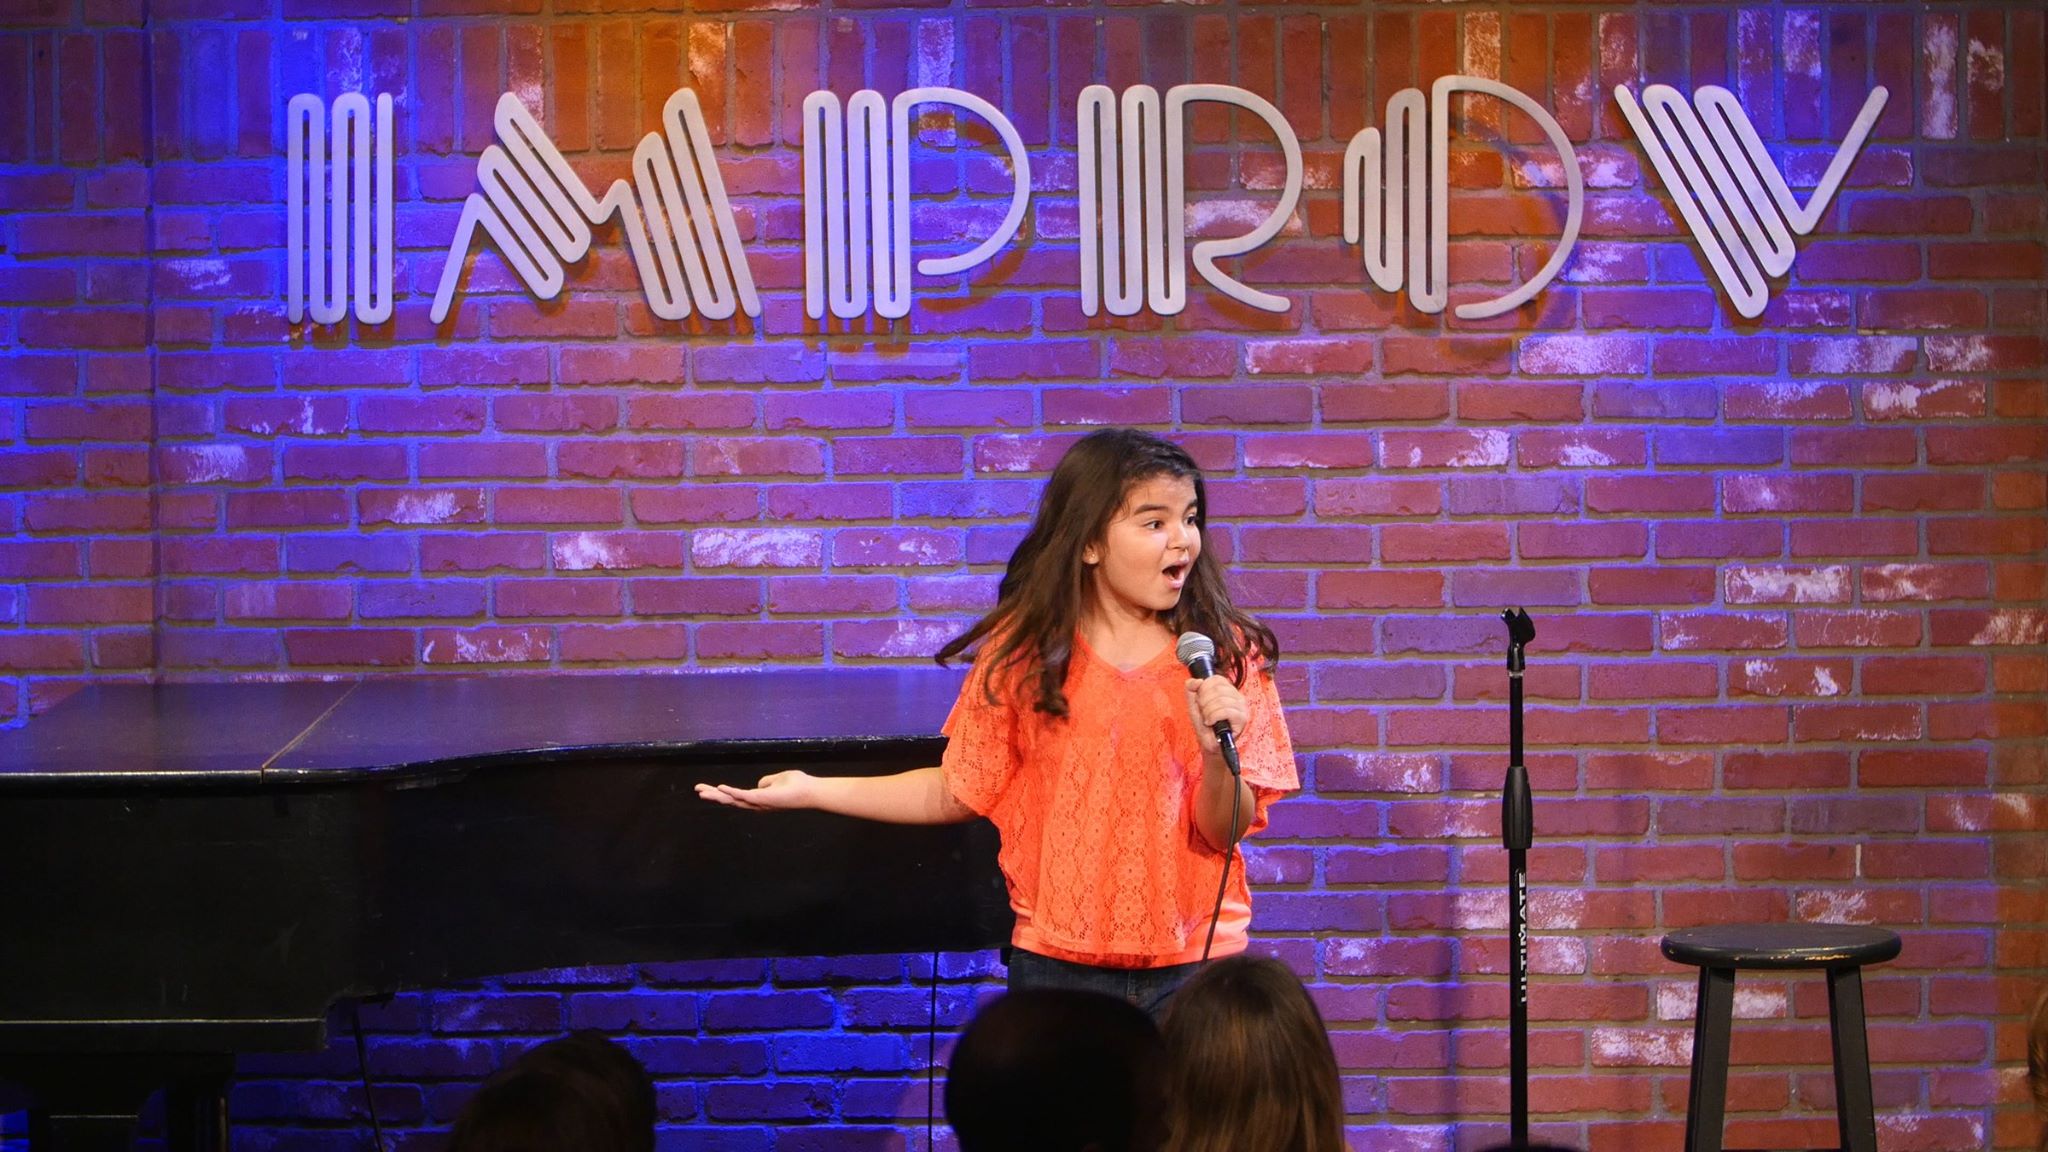 Stand Up Comedy at The Hollywood Improv